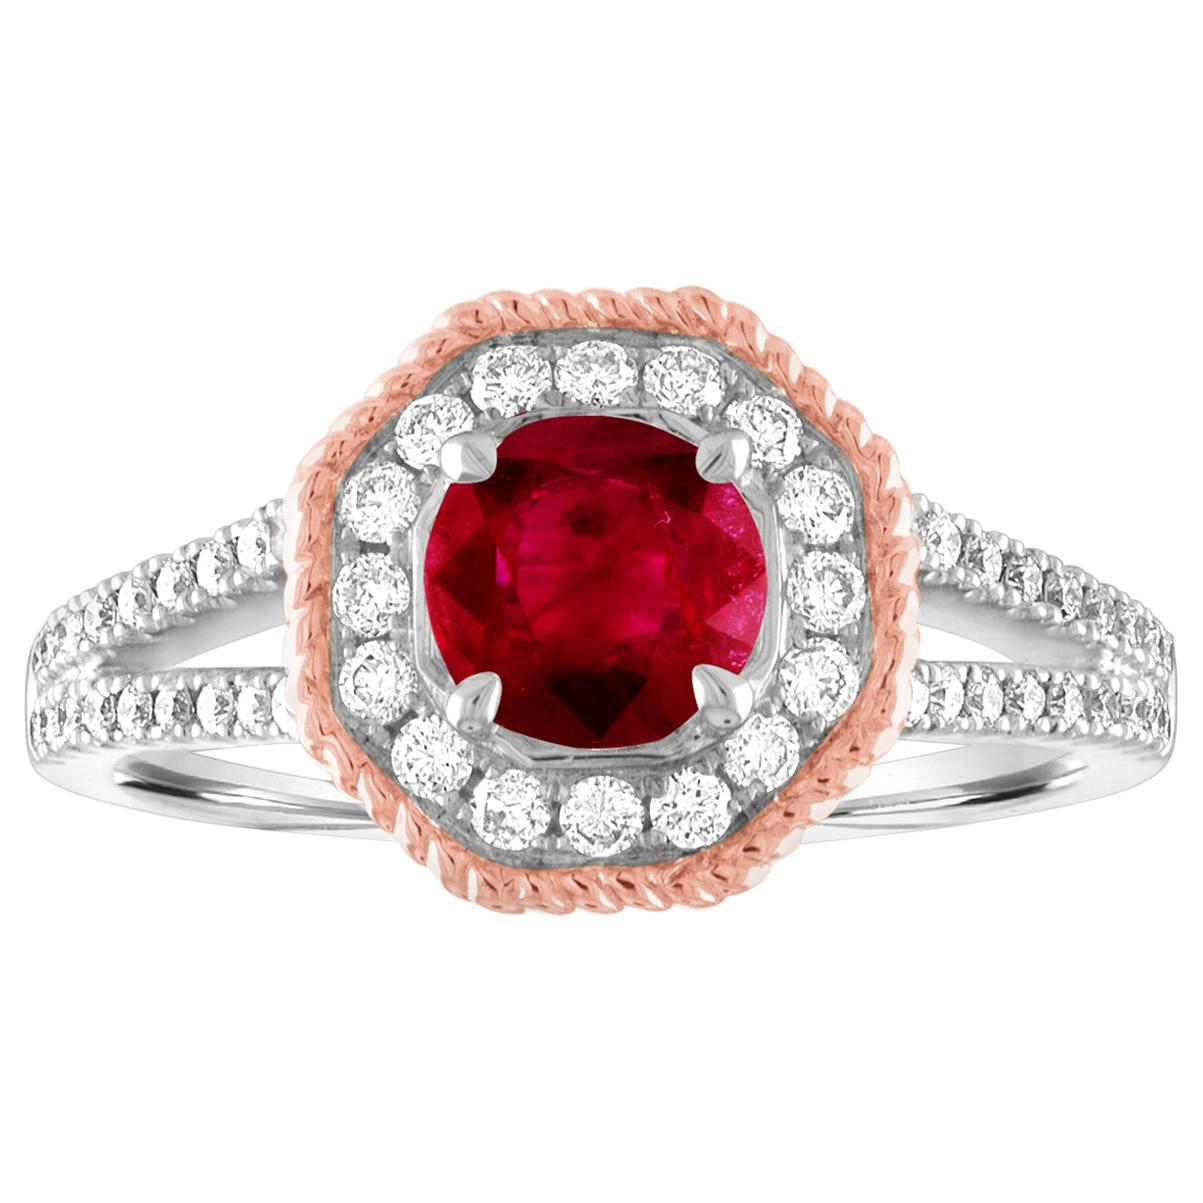 AGL Certified 1.05 Carat Round Ruby Diamond Gold Ring